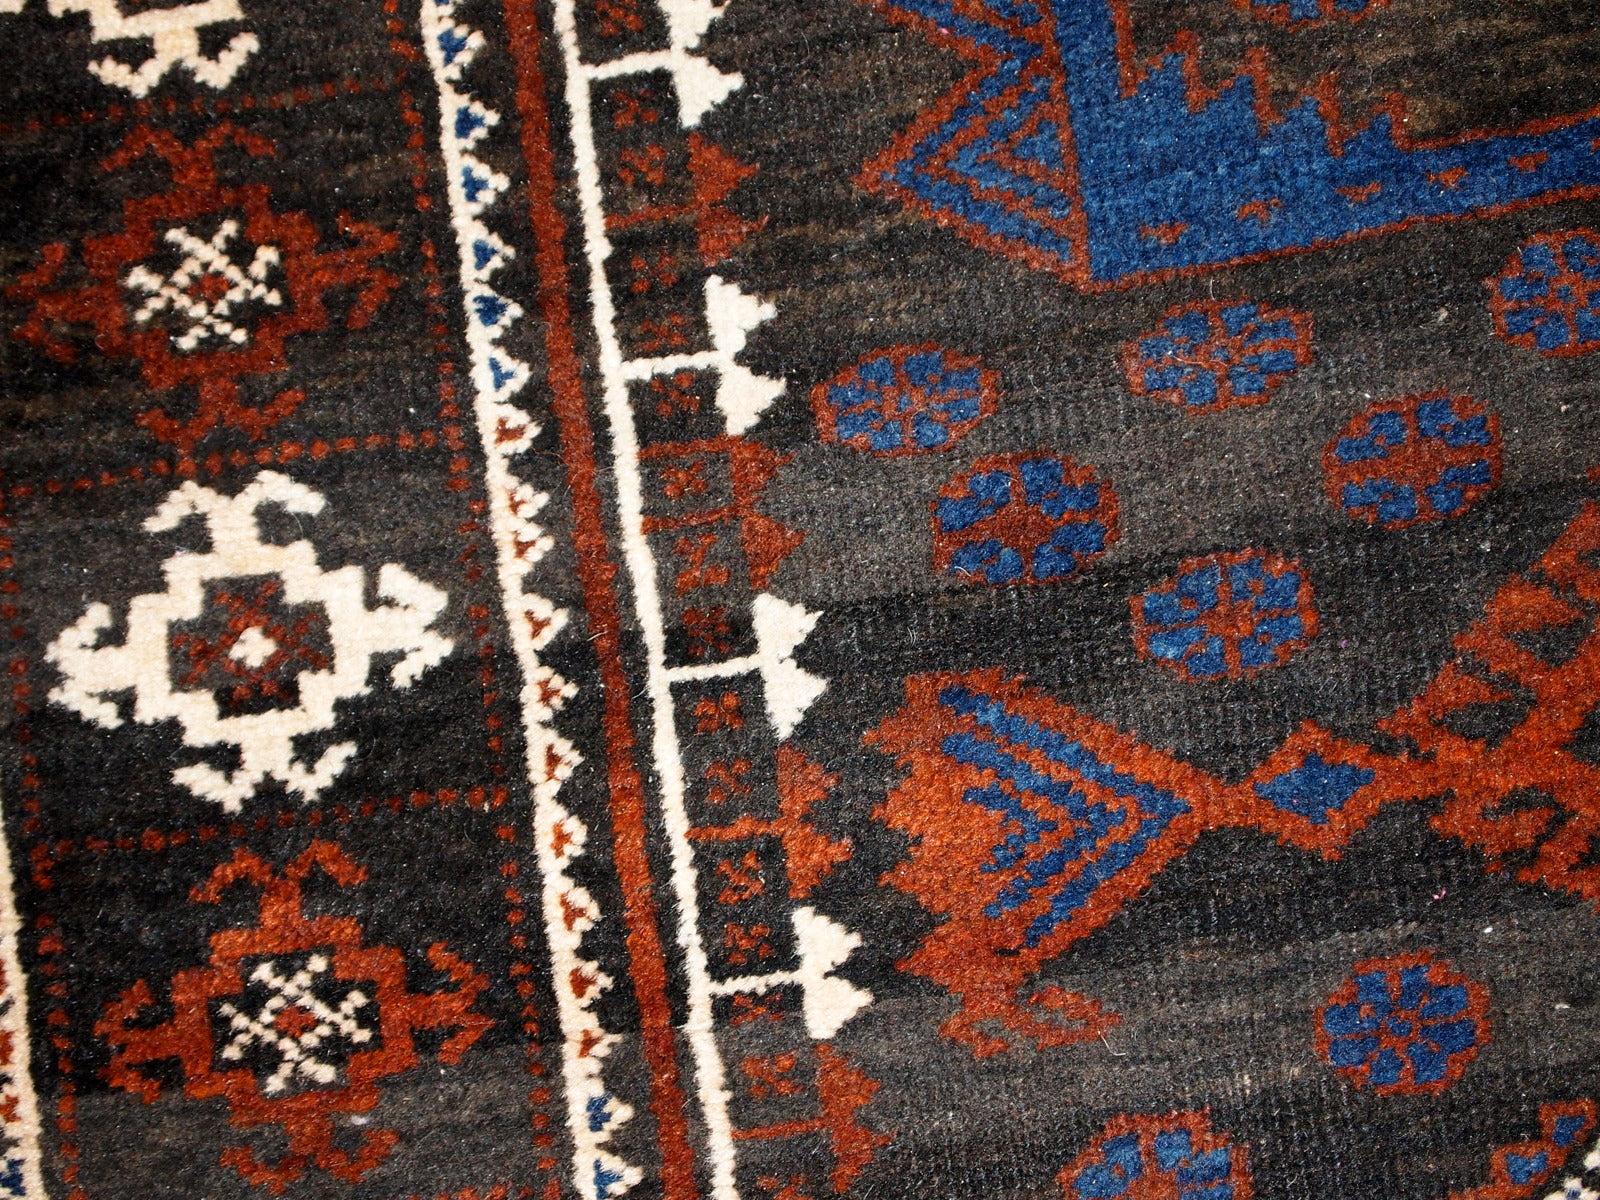 Intricate patterns and woolen texture of the Afghan Baluch rug.